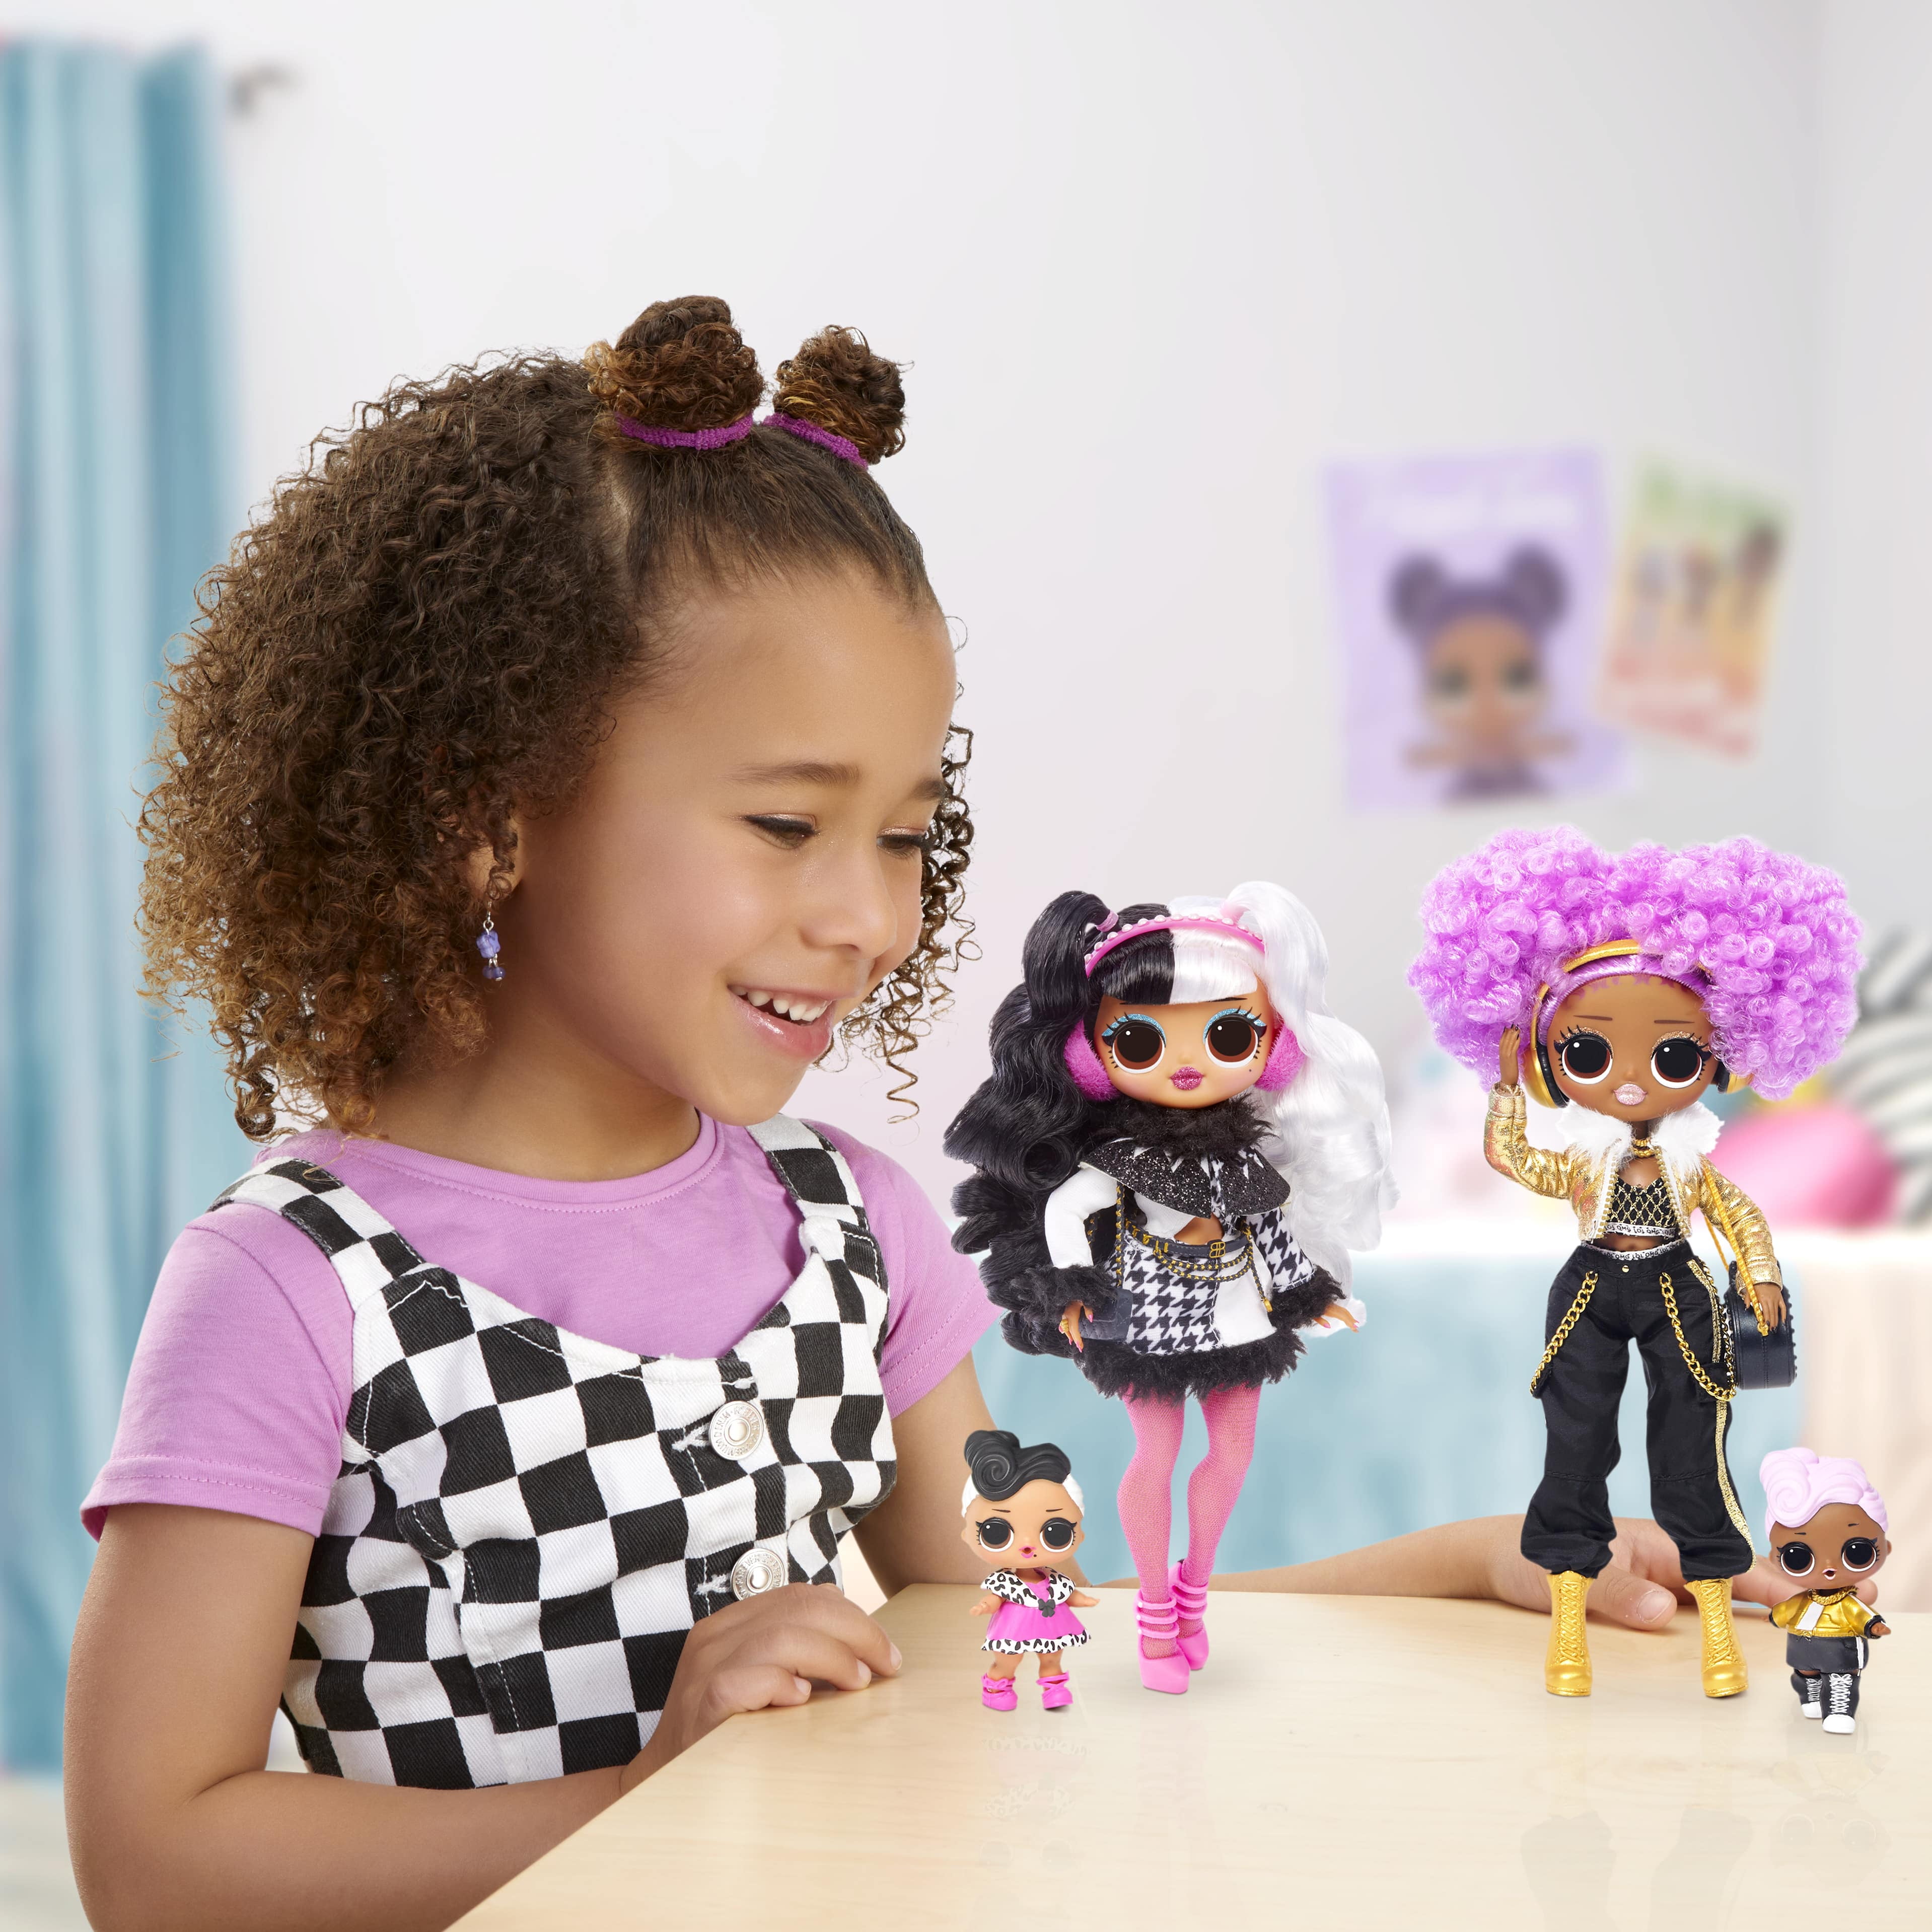 Best Buy: L.O.L. Surprise! Winter Disco OMG Doll Styles May Vary 561781